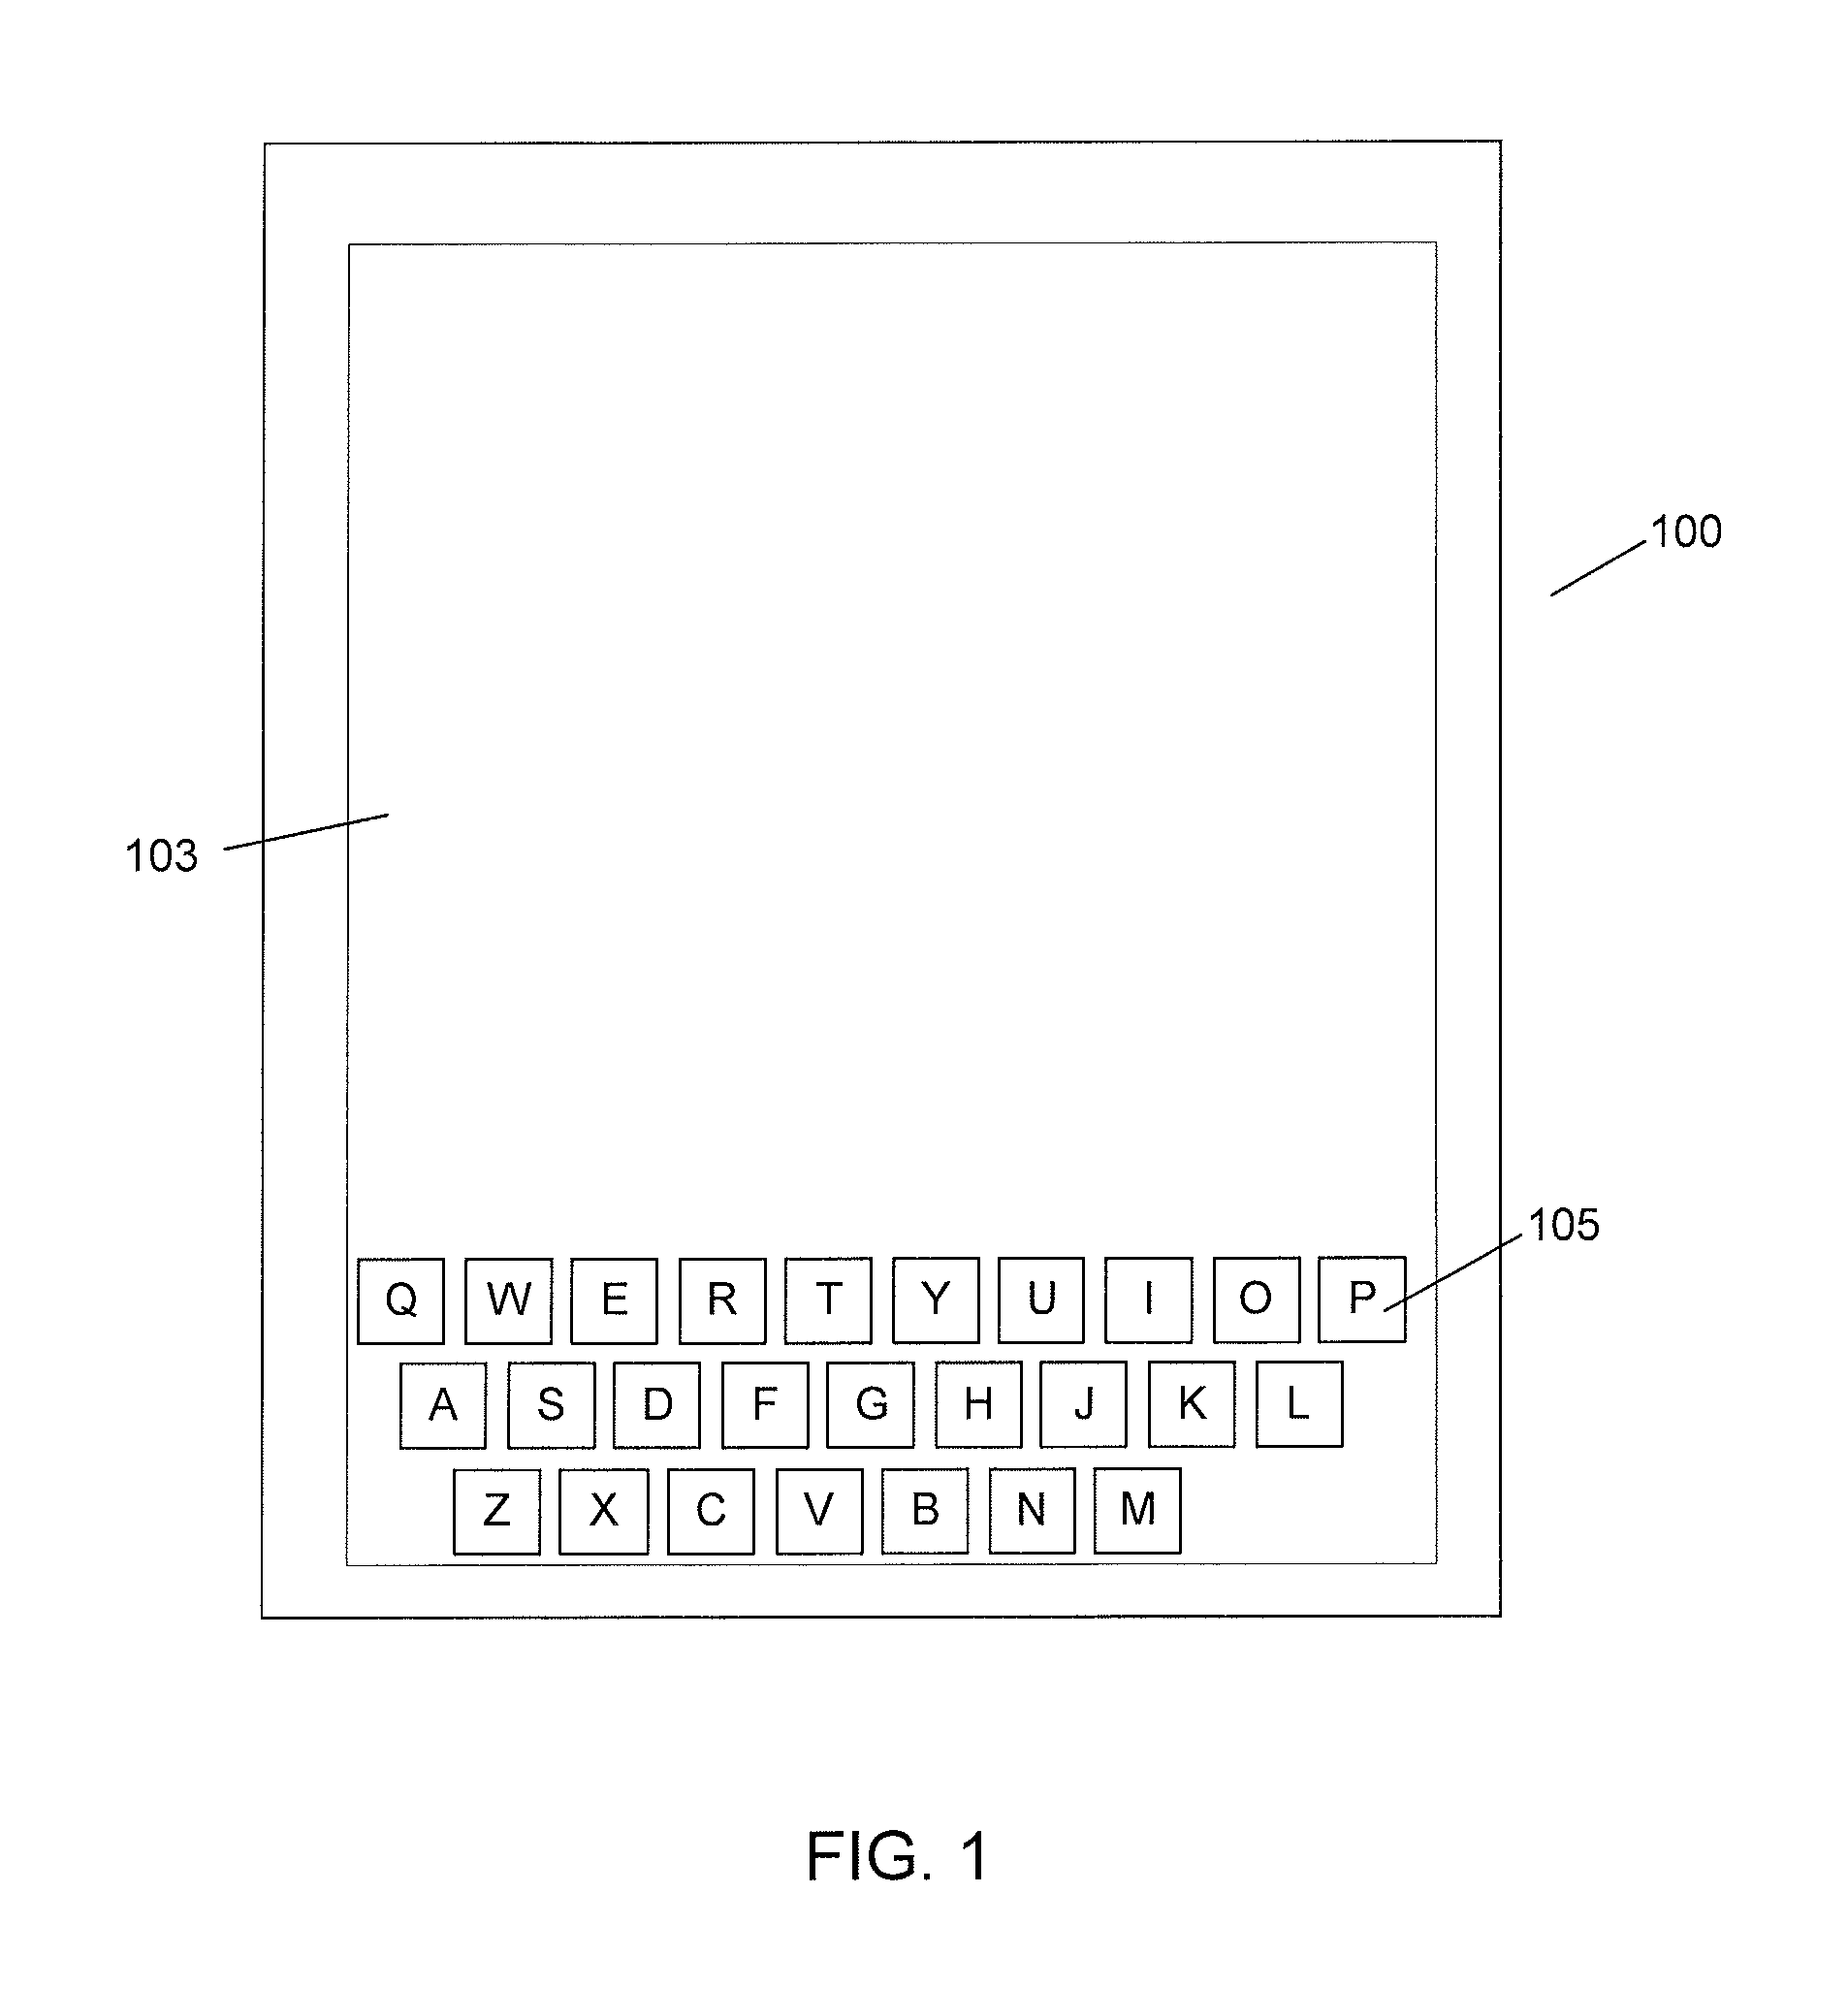 User interface for text input and virtual keyboard manipulation